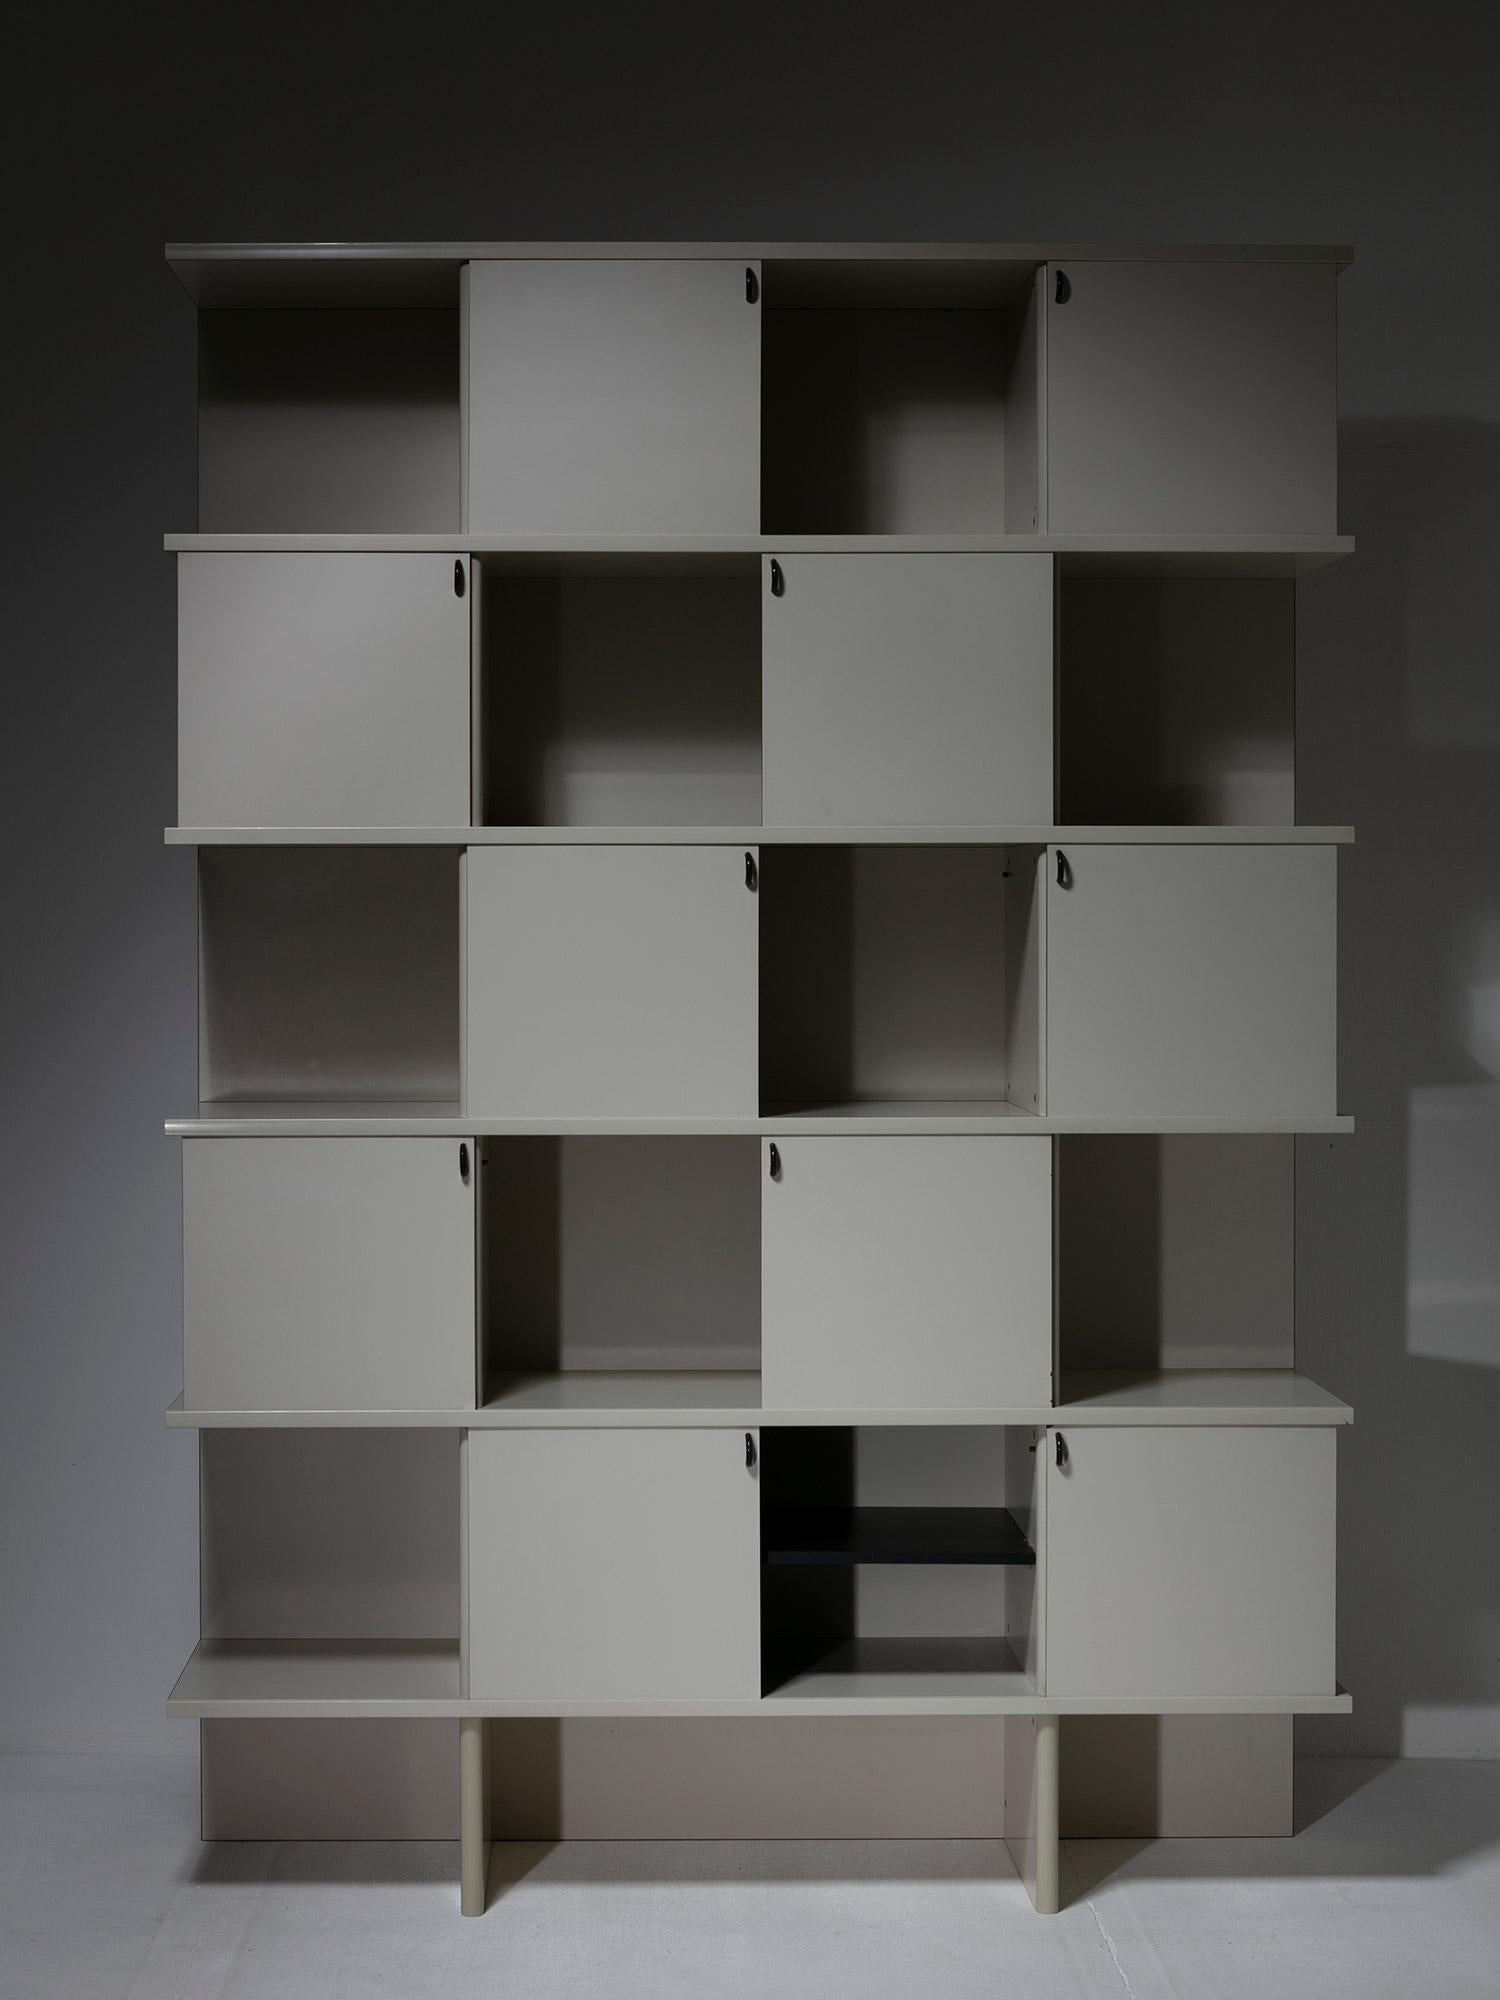 Rare Scripta bookcase by Giovanni Carini for Planula.
Five pairs of sliding doors allow to create different graphic effects based on squared shapes.